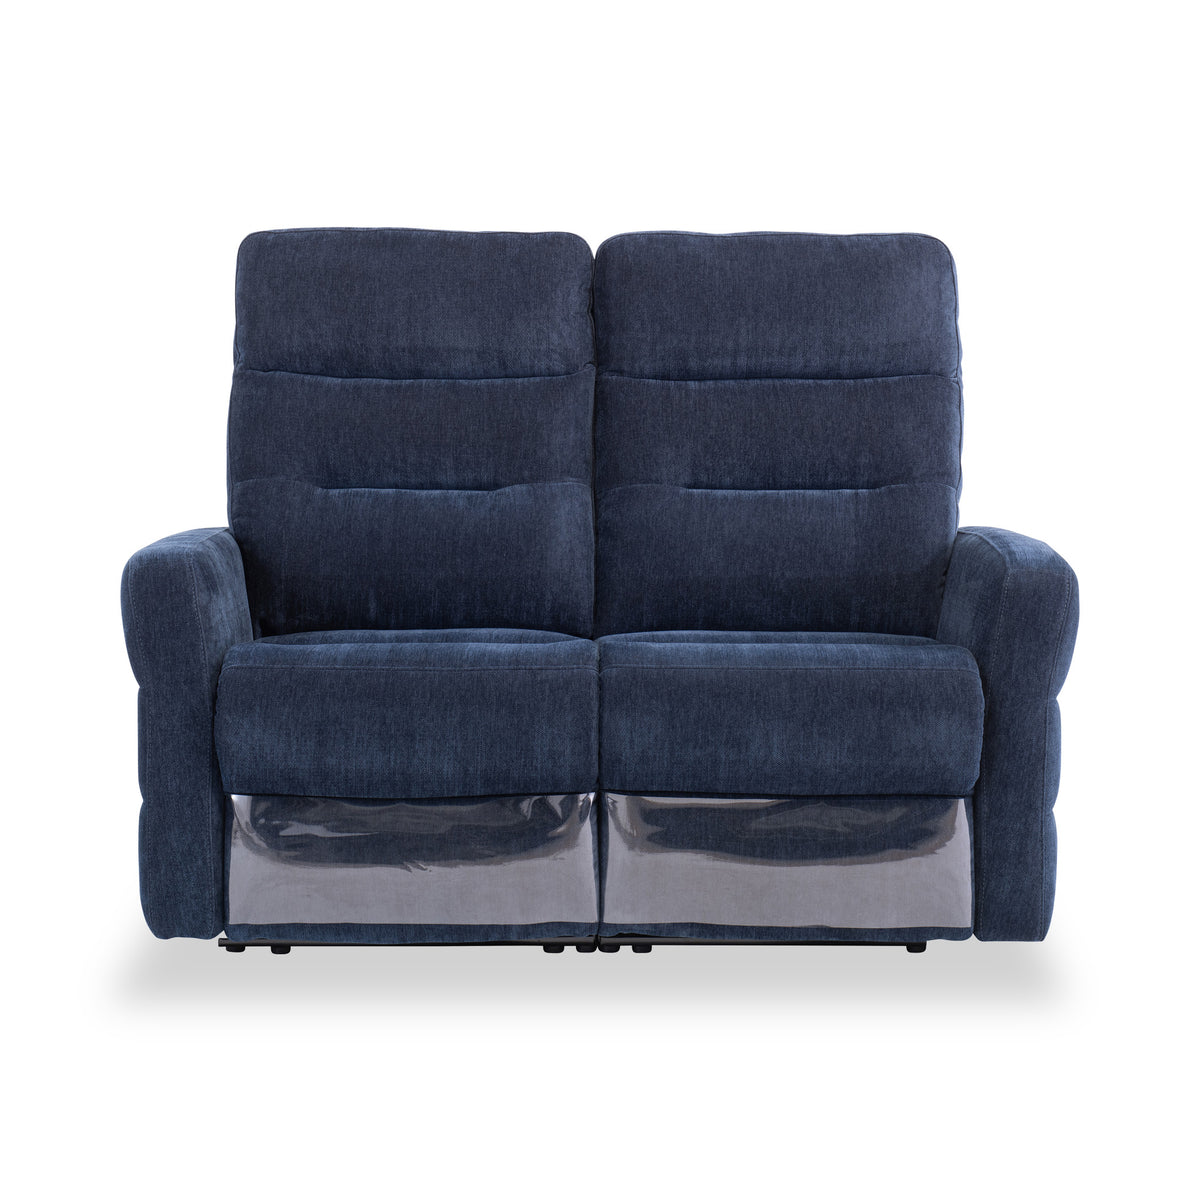 Dalton Navy Blue Fabric Electric Reclining 2 Seater Sofa from Roseland Furniture